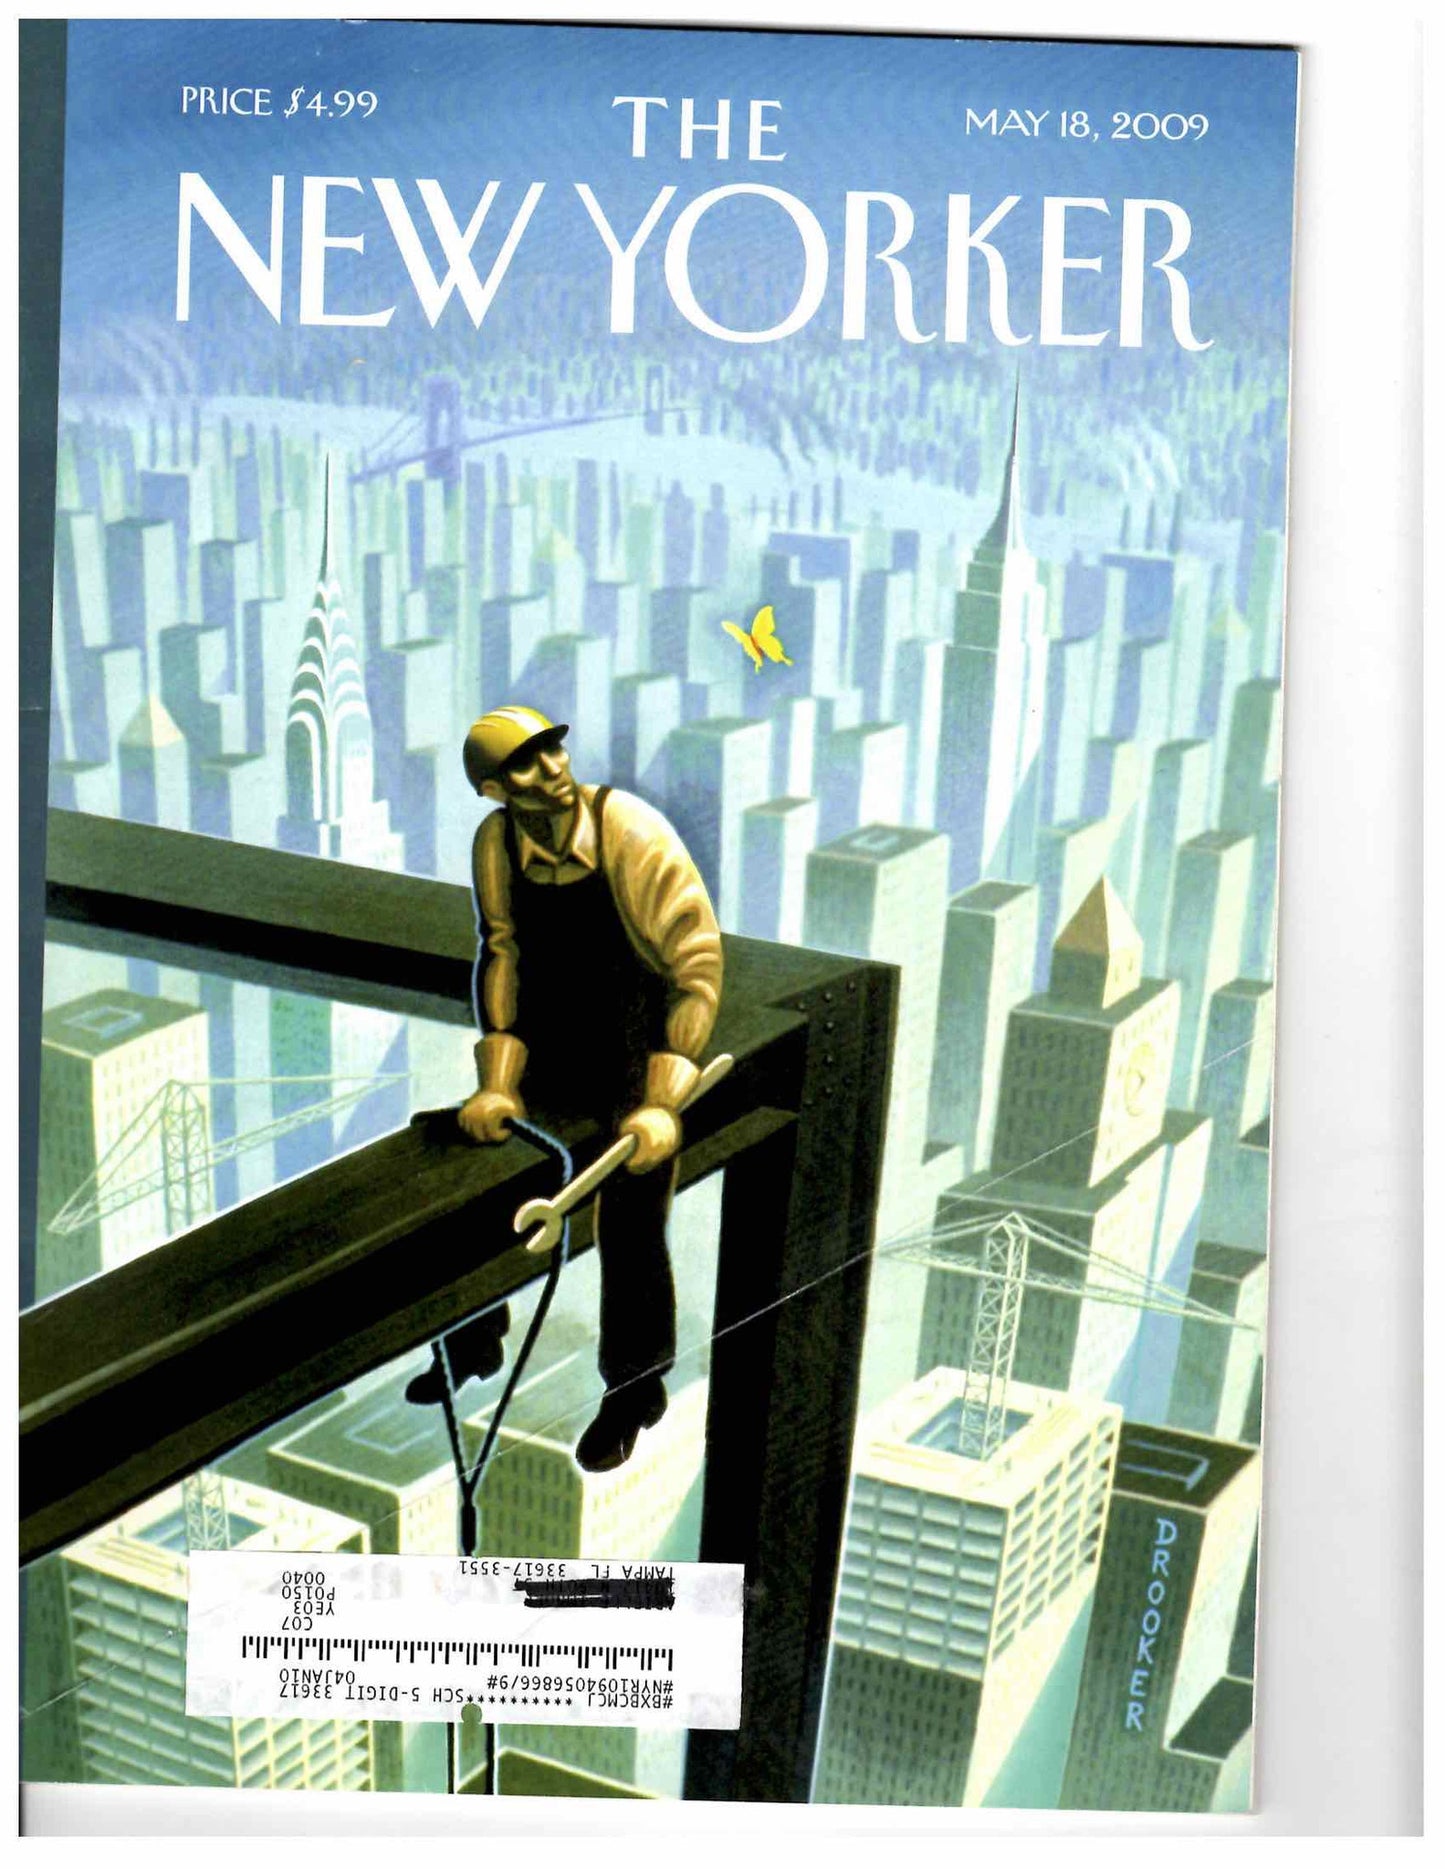 05 18 2009 The New Yorker